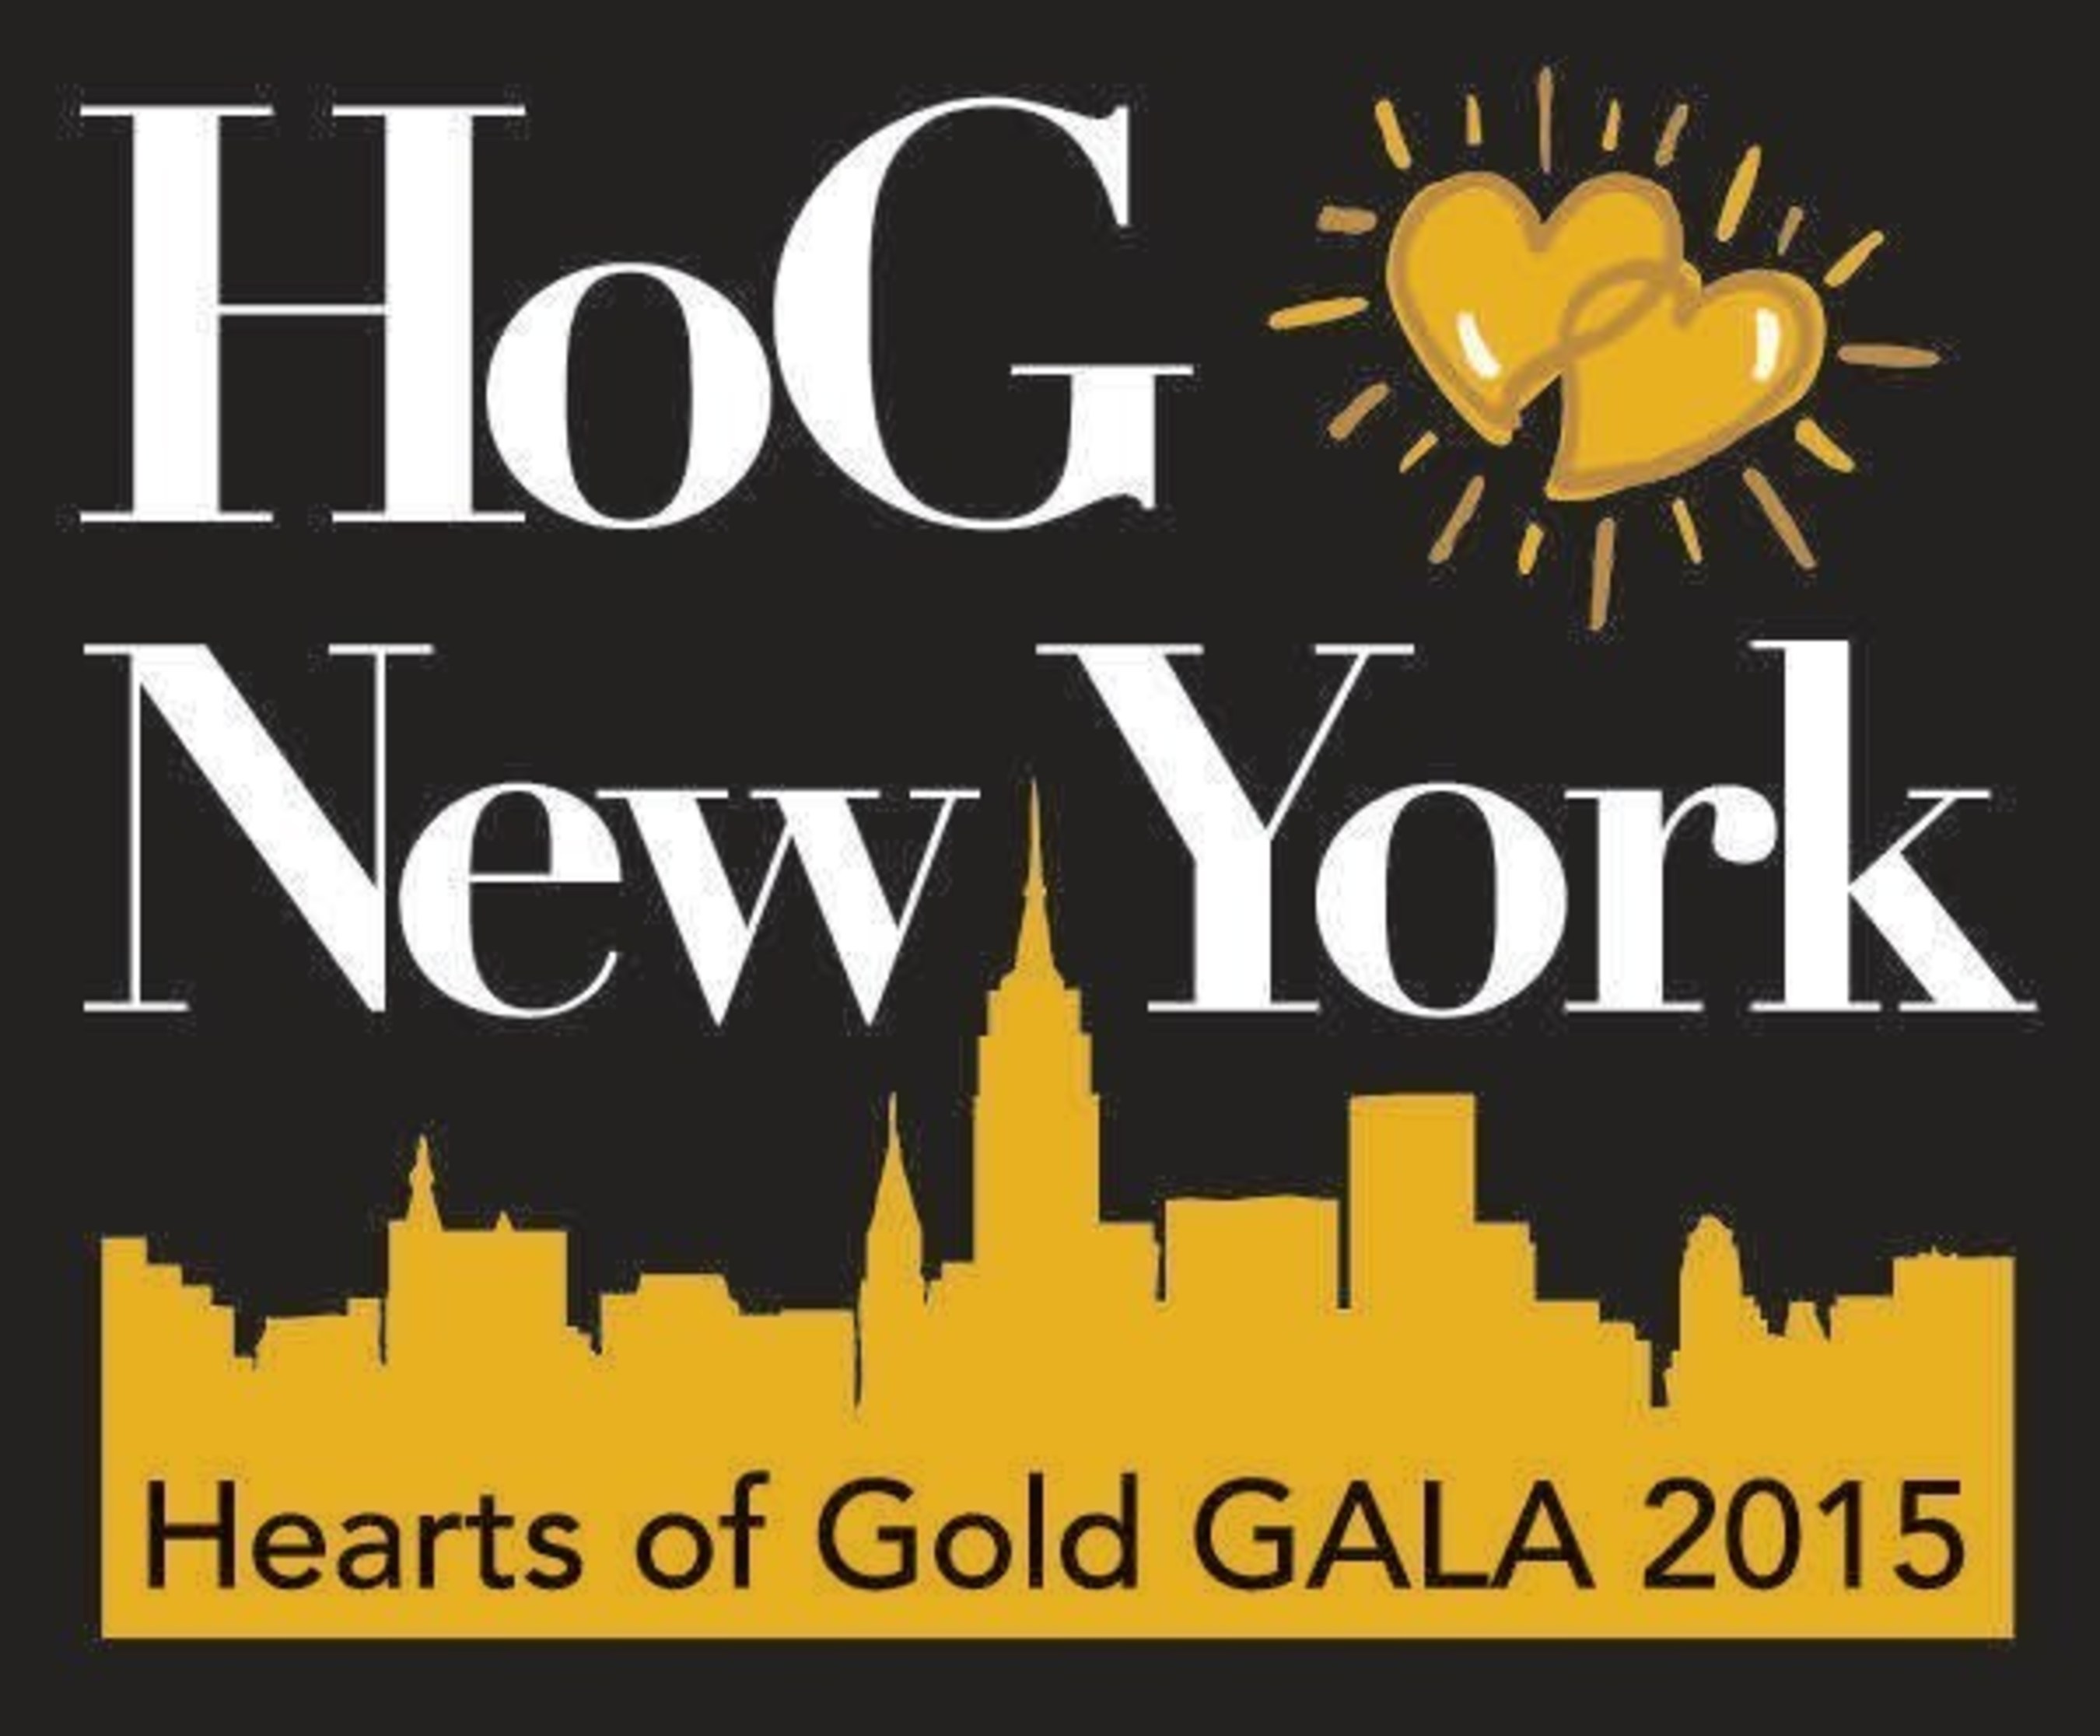 The 2015 Hearts of Gold Gala, "HoG Loves New York," will take place on Thursday, November 5, 2015 at 7:00 p.m. at NASDAQ MarketSite in Times Square. Proceeds from the event fund the nonprofit's mission to "reimagine the future of homeless mothers and their children, together." Sponsorship packages begin at $15,000 and individual Gala tickets start at $750. To participate, call (212) 206-1461 or visit http://www.heartsofgold.org/.